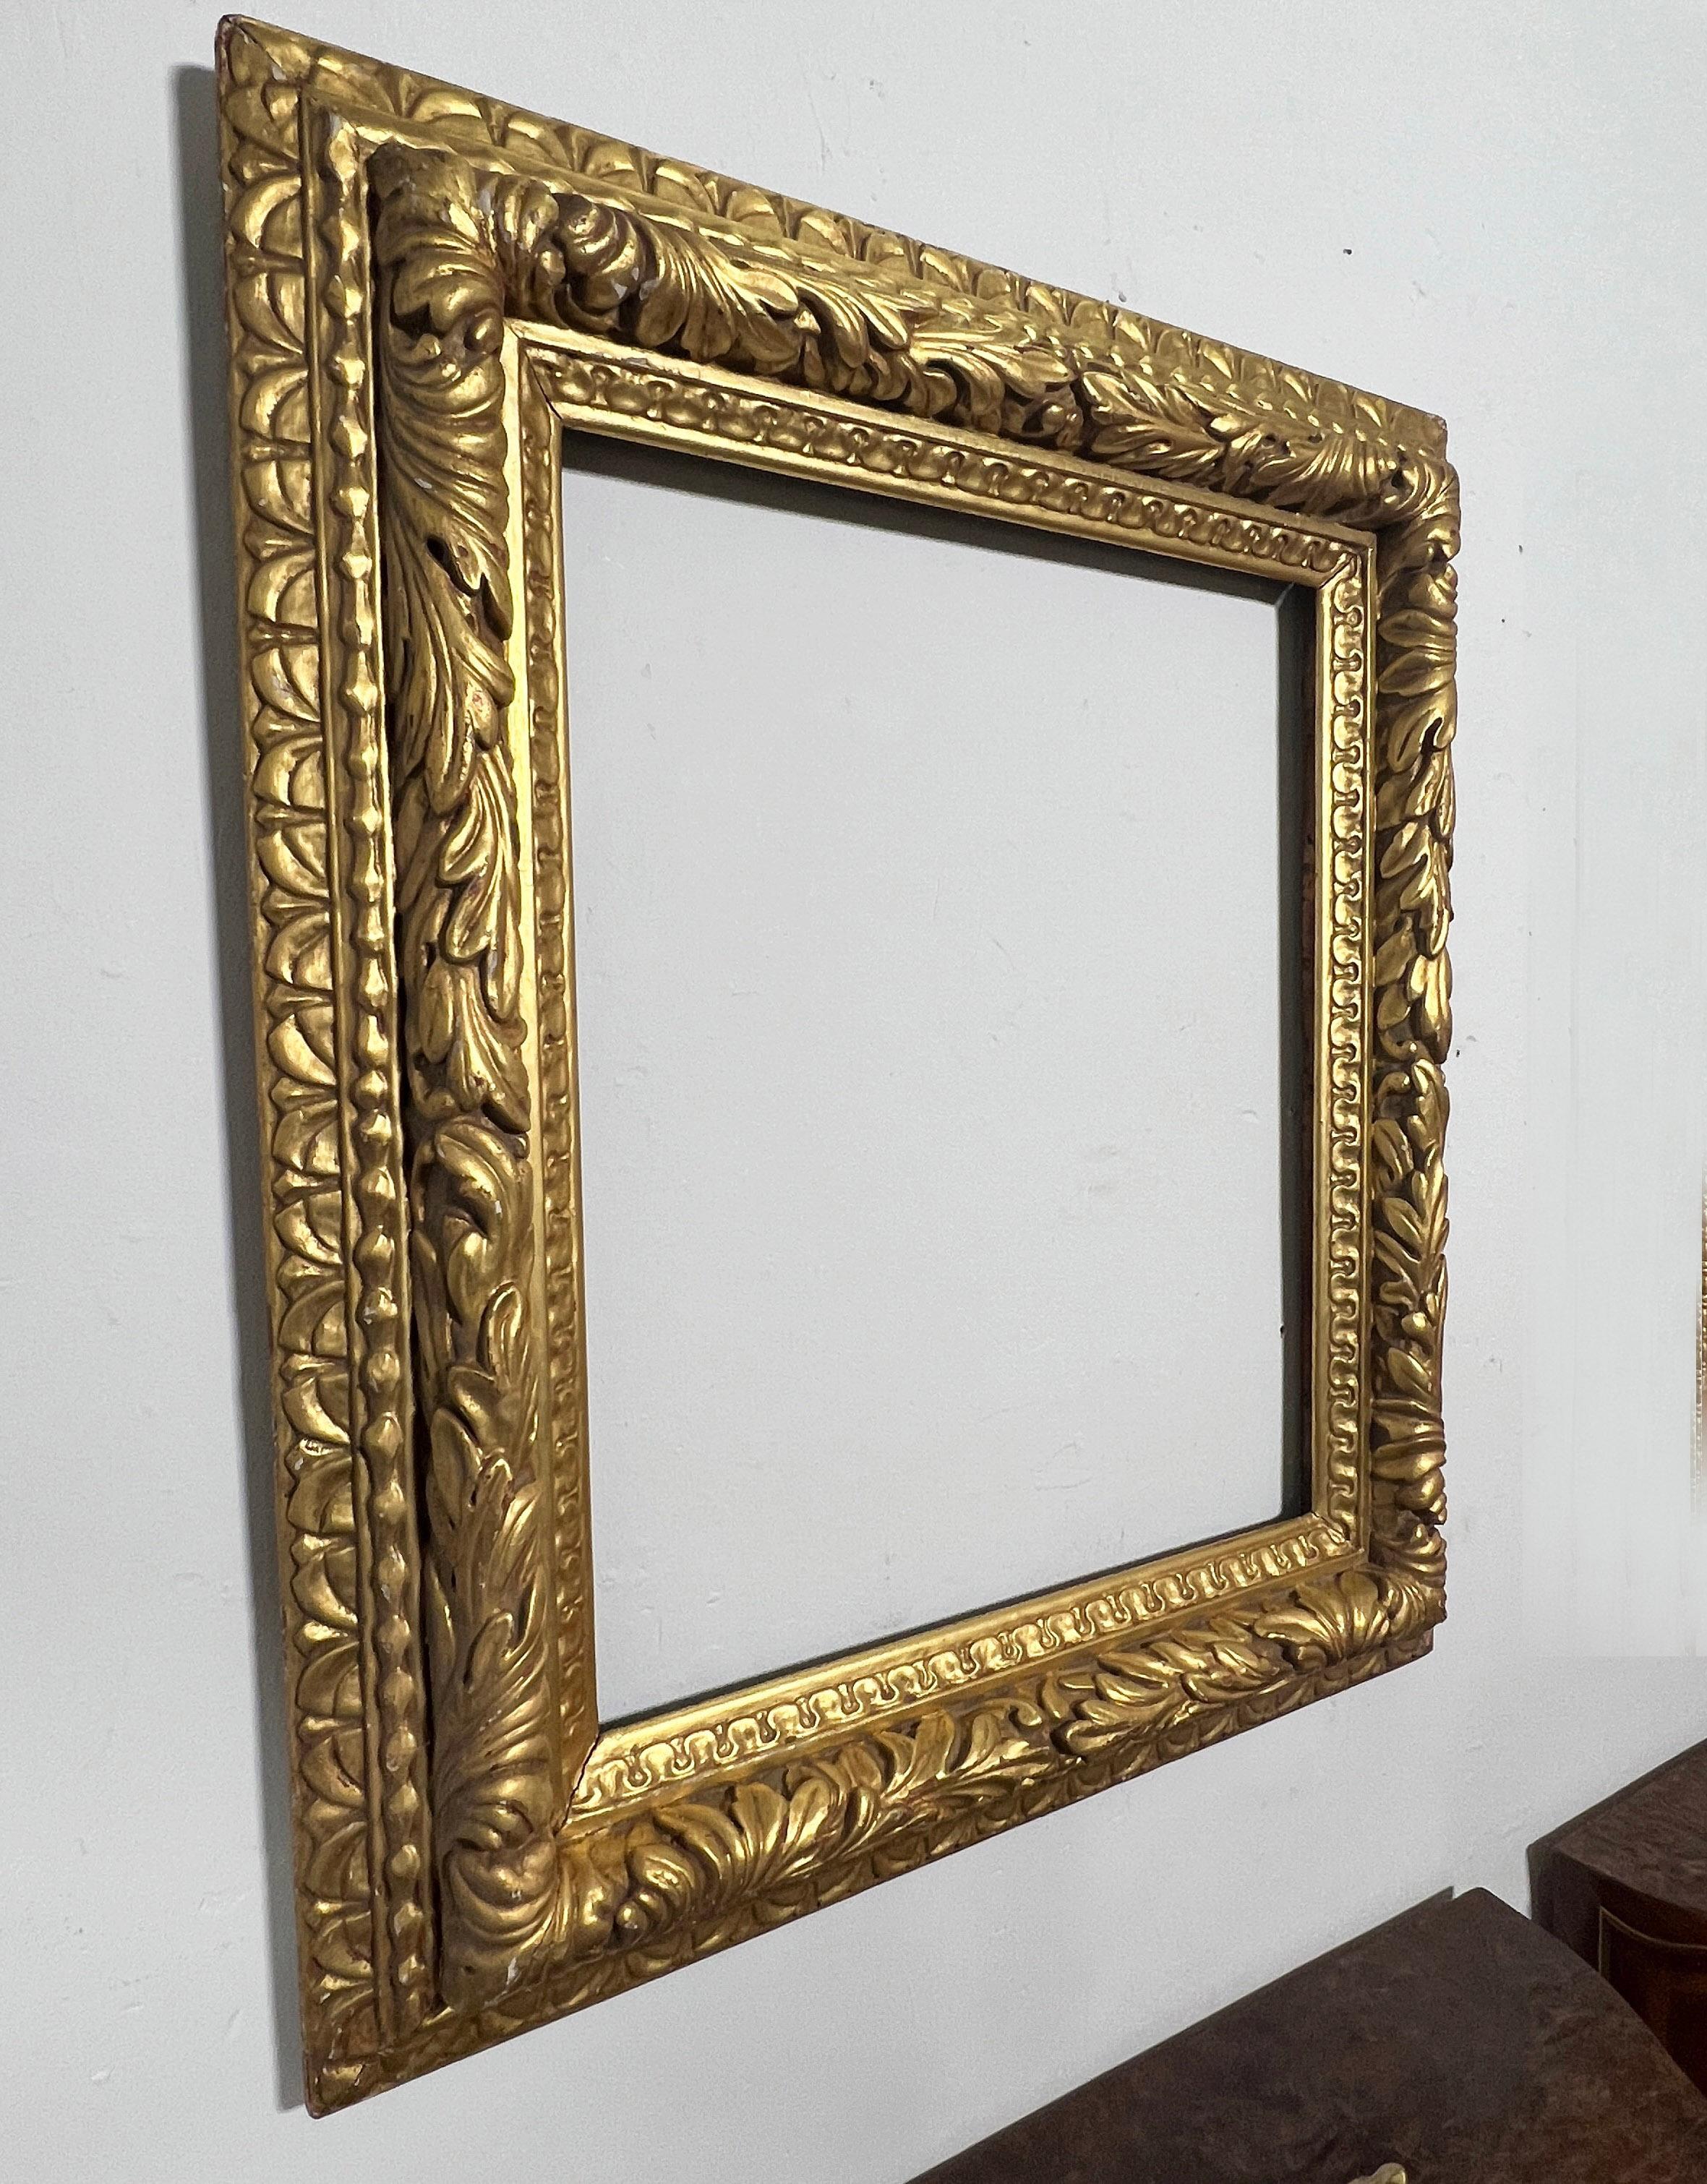 Hand carved and gilded Aesthetic Movement frame by the noted Boston area maker Charles Prendergast, signed and dated 1902. Along with his brother Maurice, Charles was one of the most influential members of the American Arts and Crafts movement,